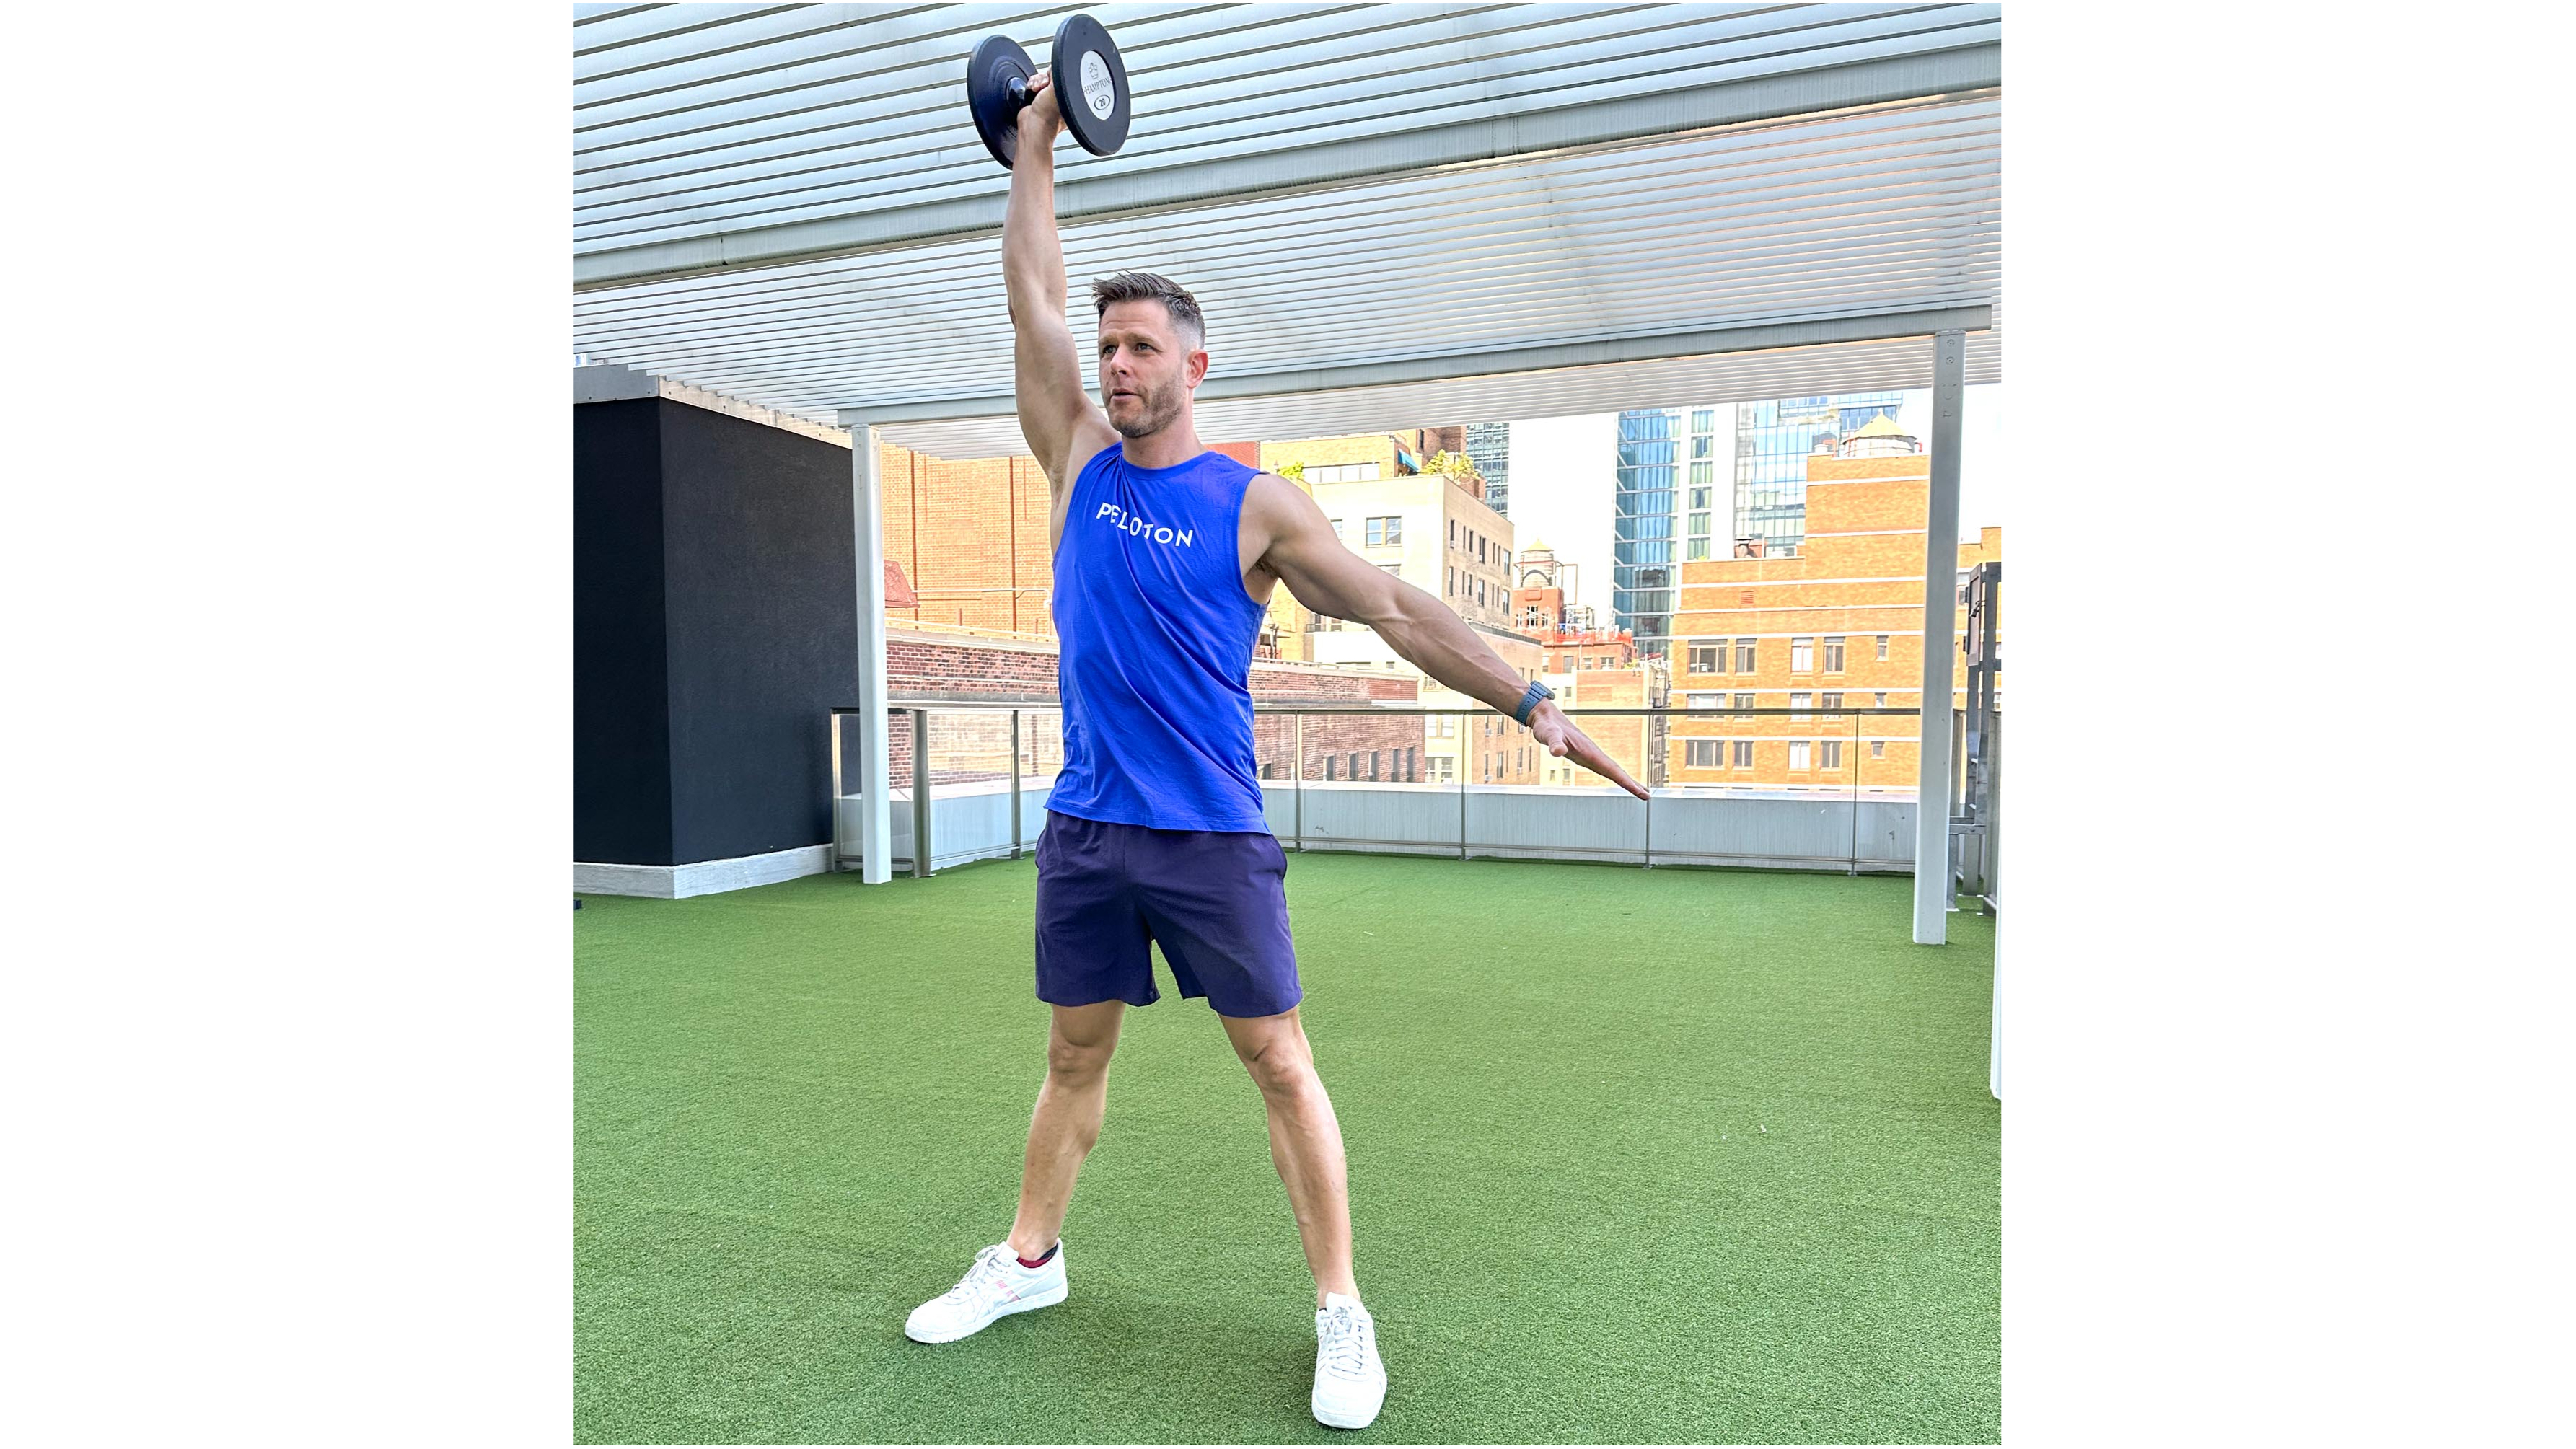 Andy Speer performing a dumbbell snatch